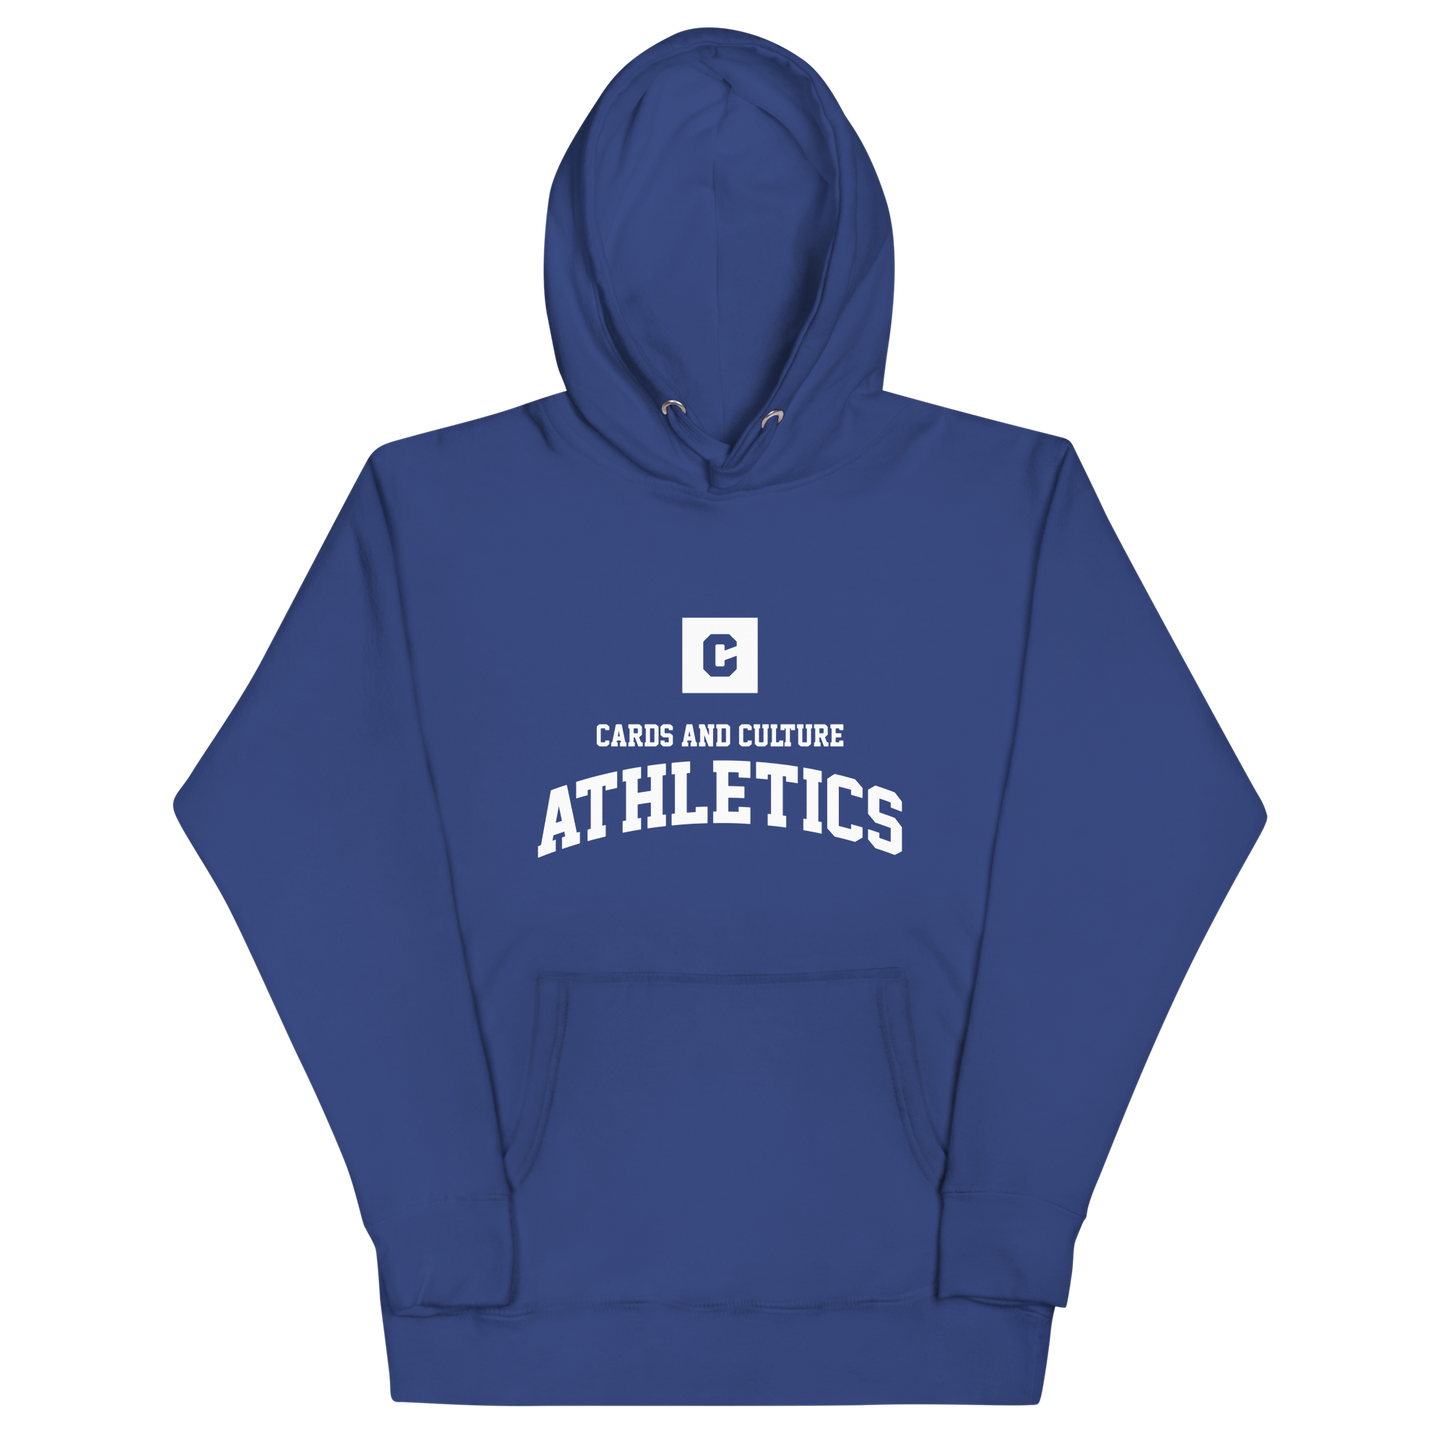 Cards and Culture Athletics Hoodie